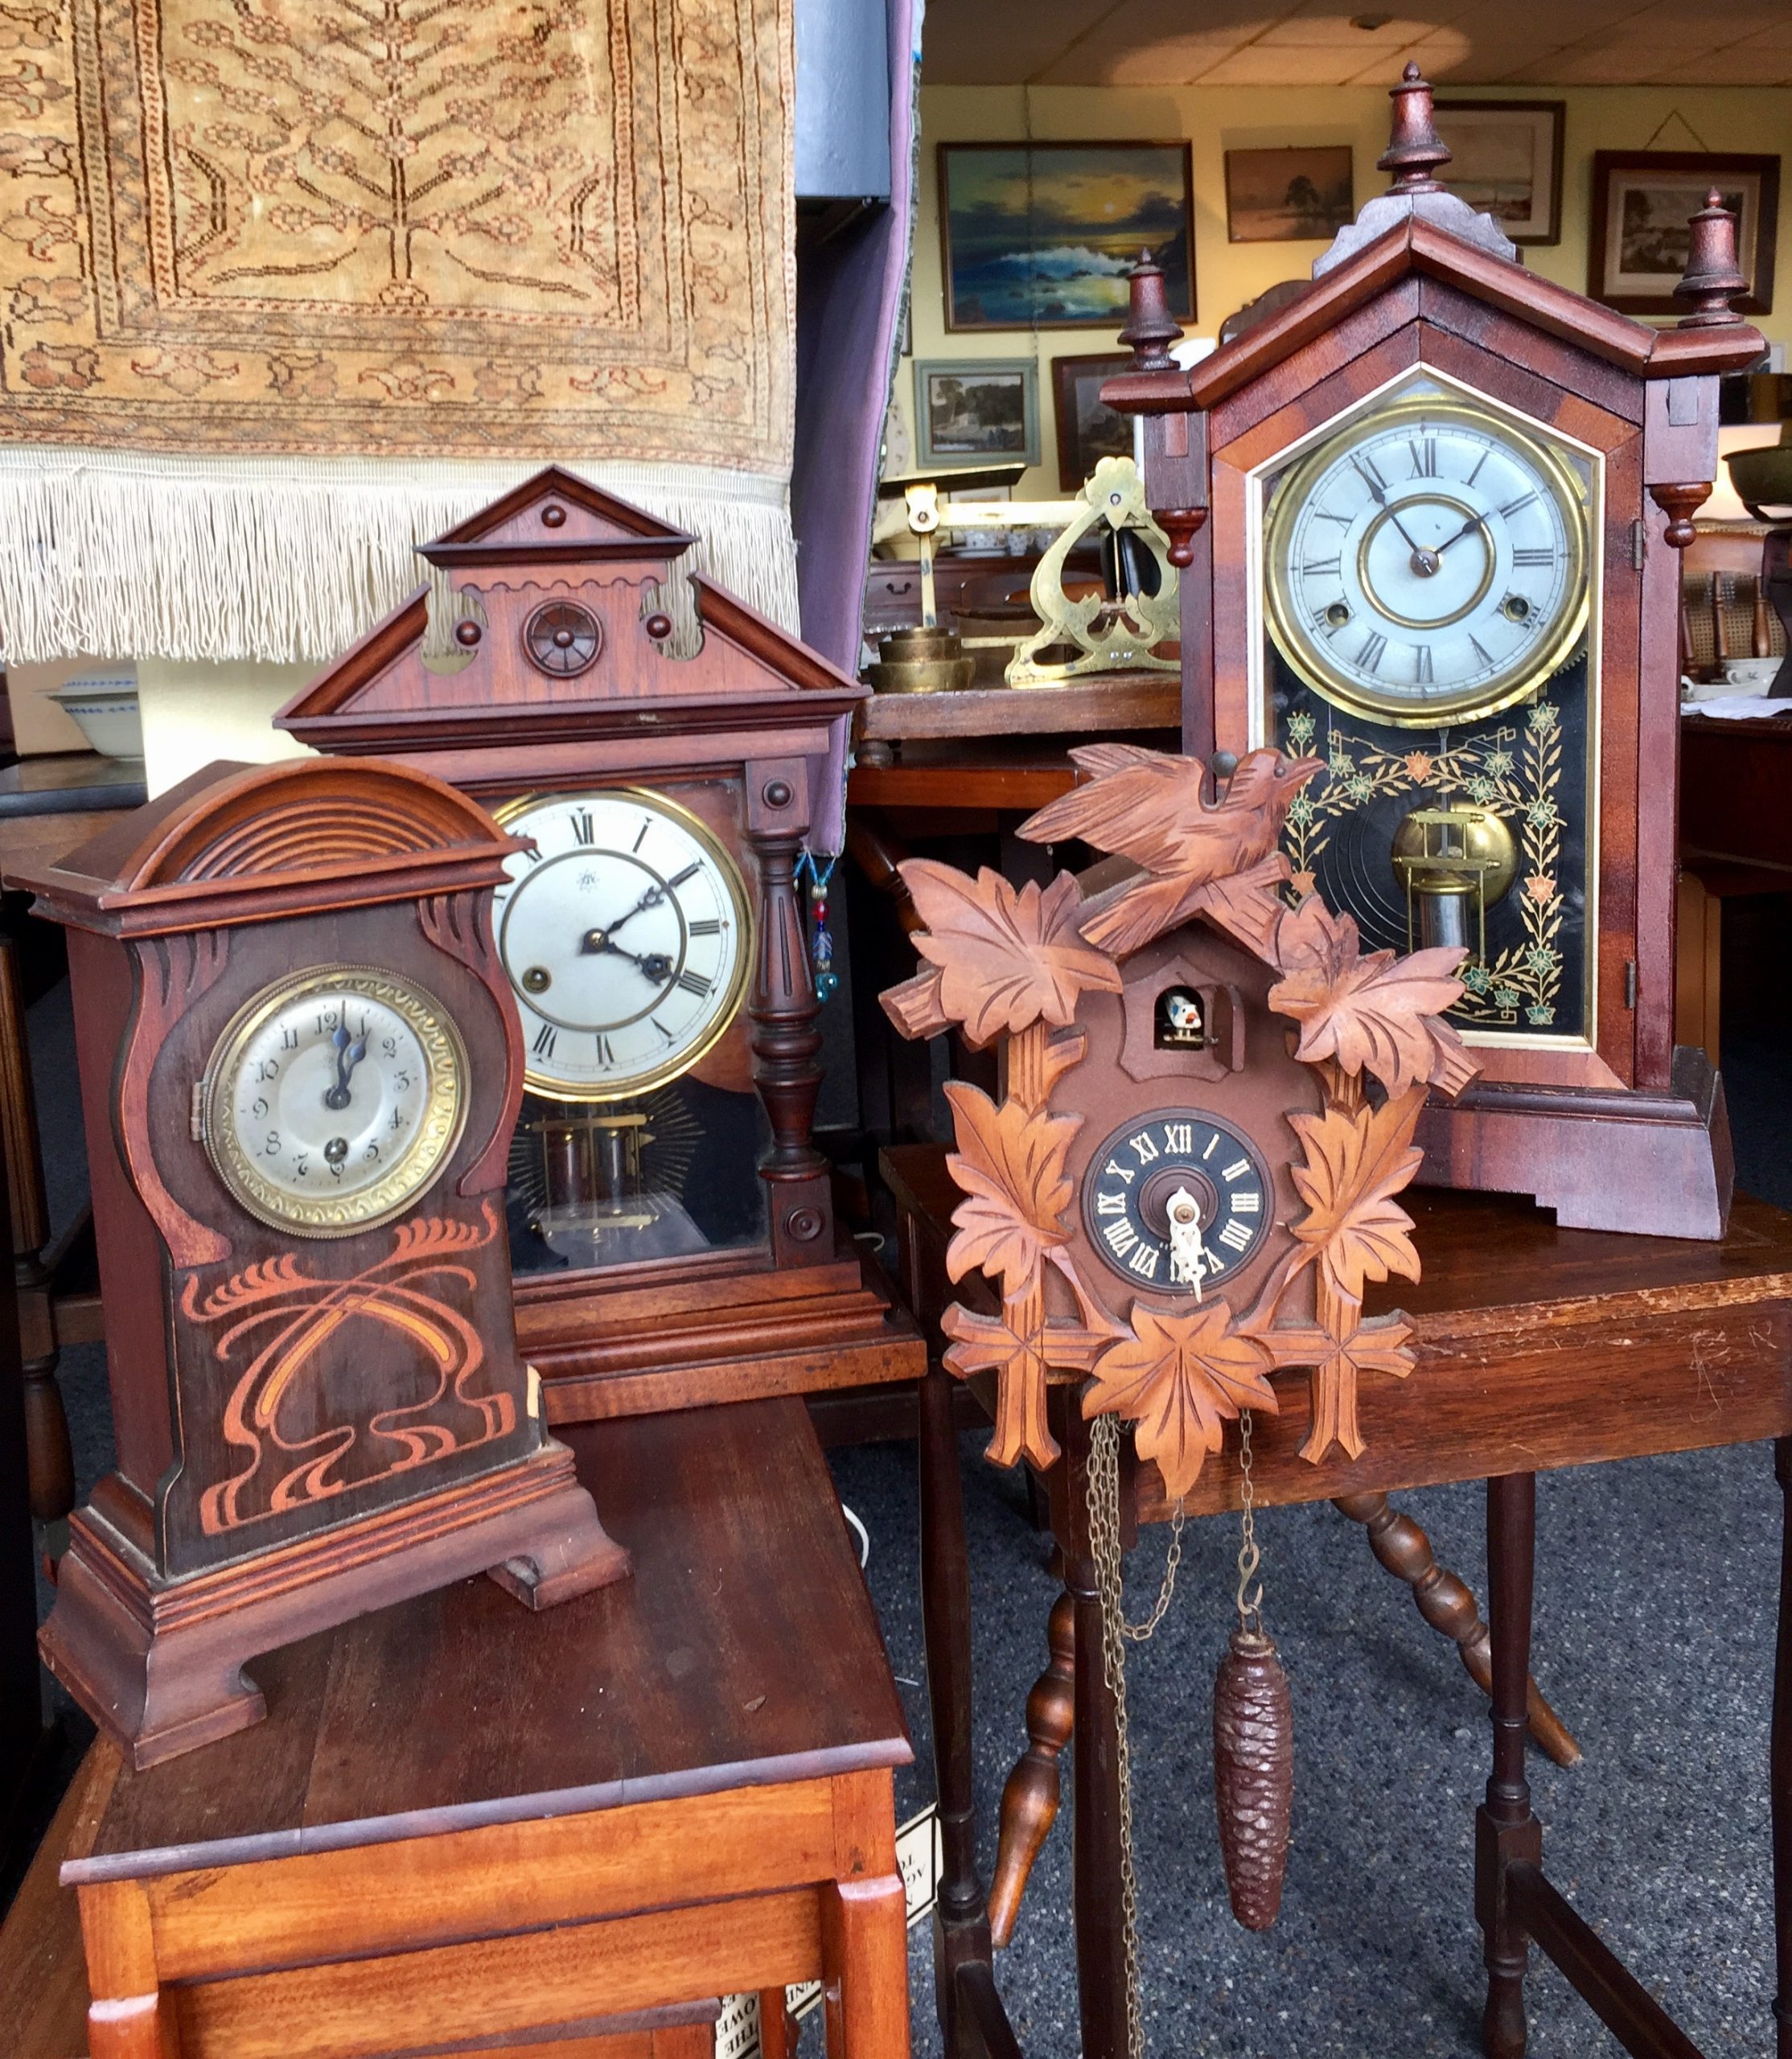 clock and watches